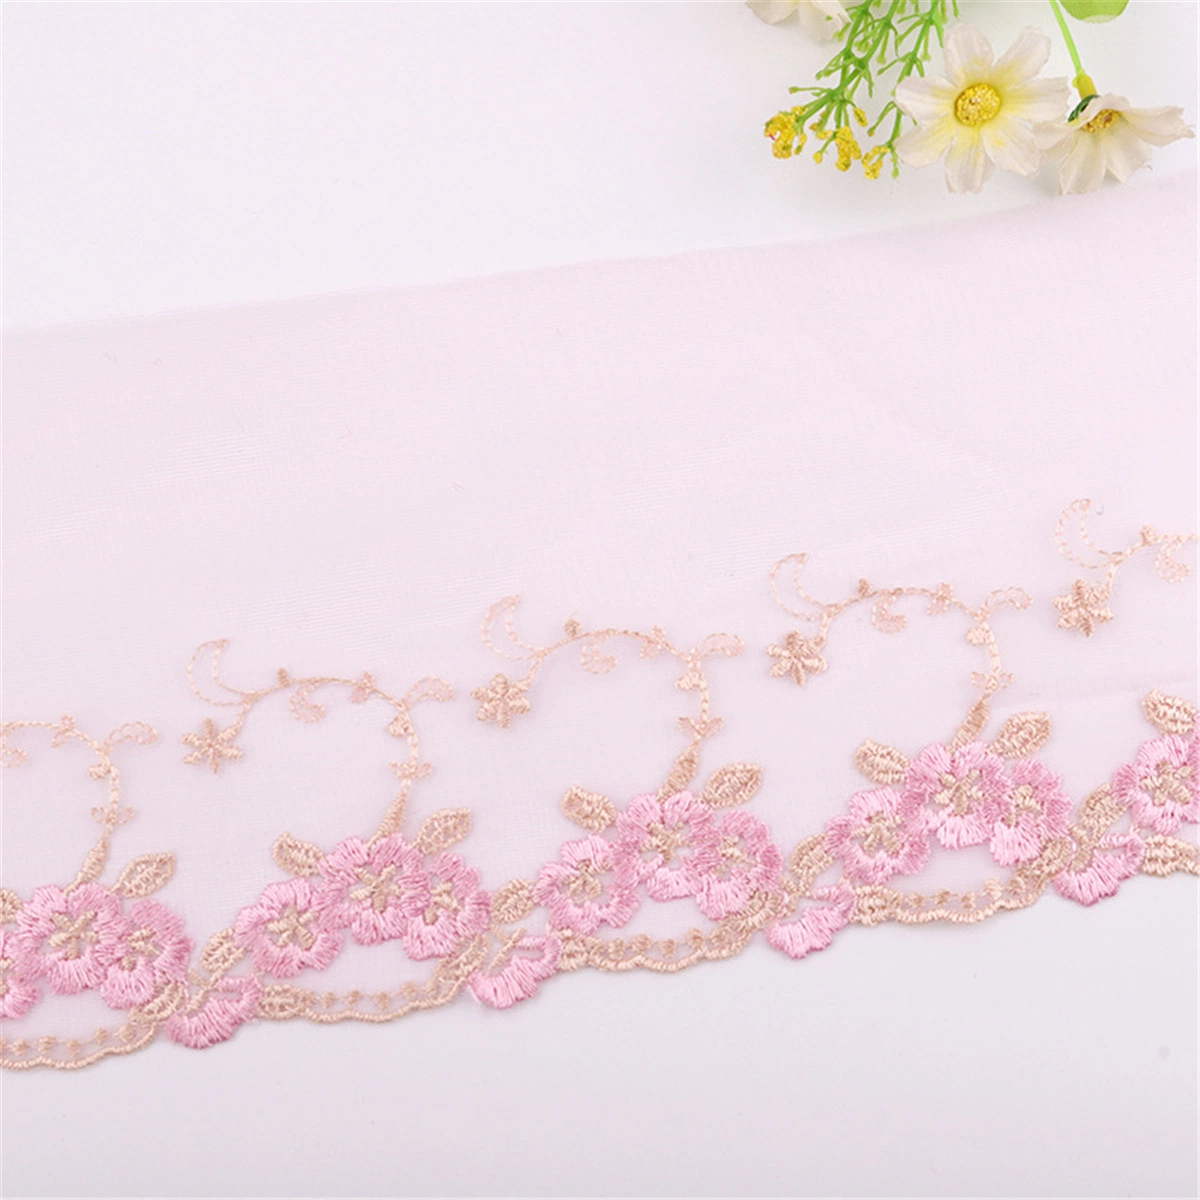 High-End Wedding Decoration Embroidery Mesh Cloth Lace Clothing Home Textile Accessories Color Gauze Lace